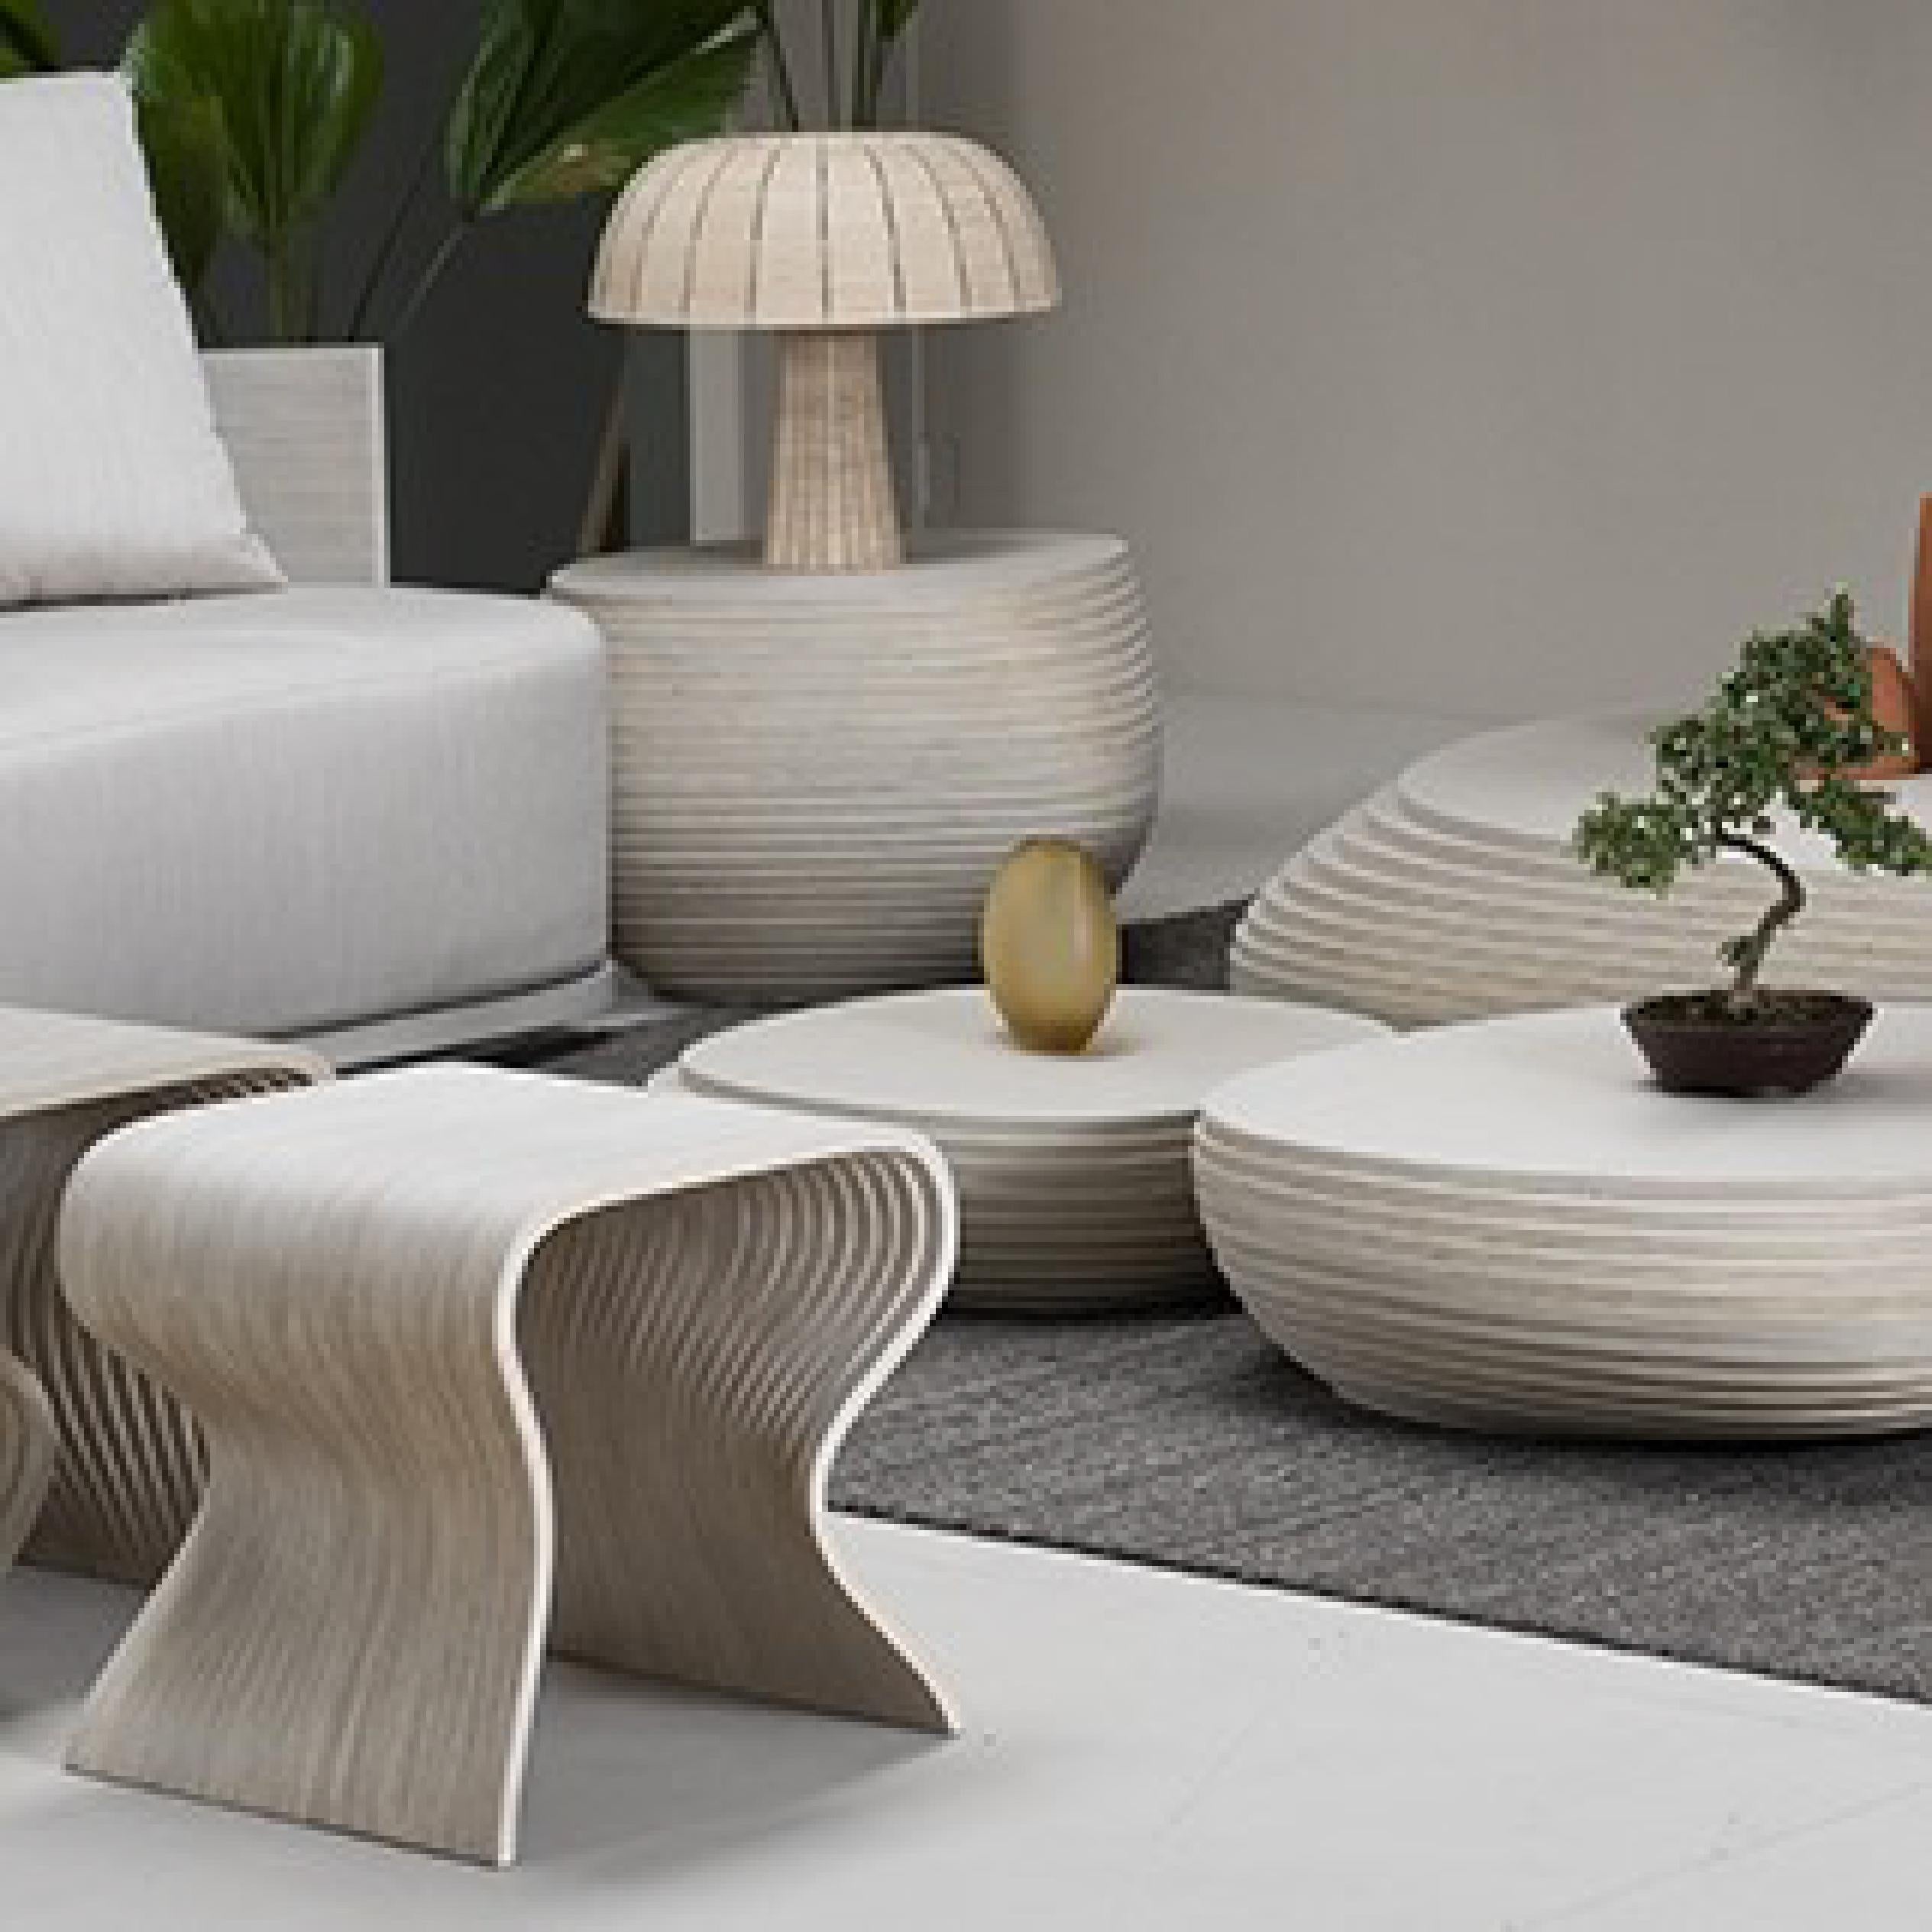 Plywood Pebbles Large by Piegatto, a Sculptural Contemporary Table For Sale